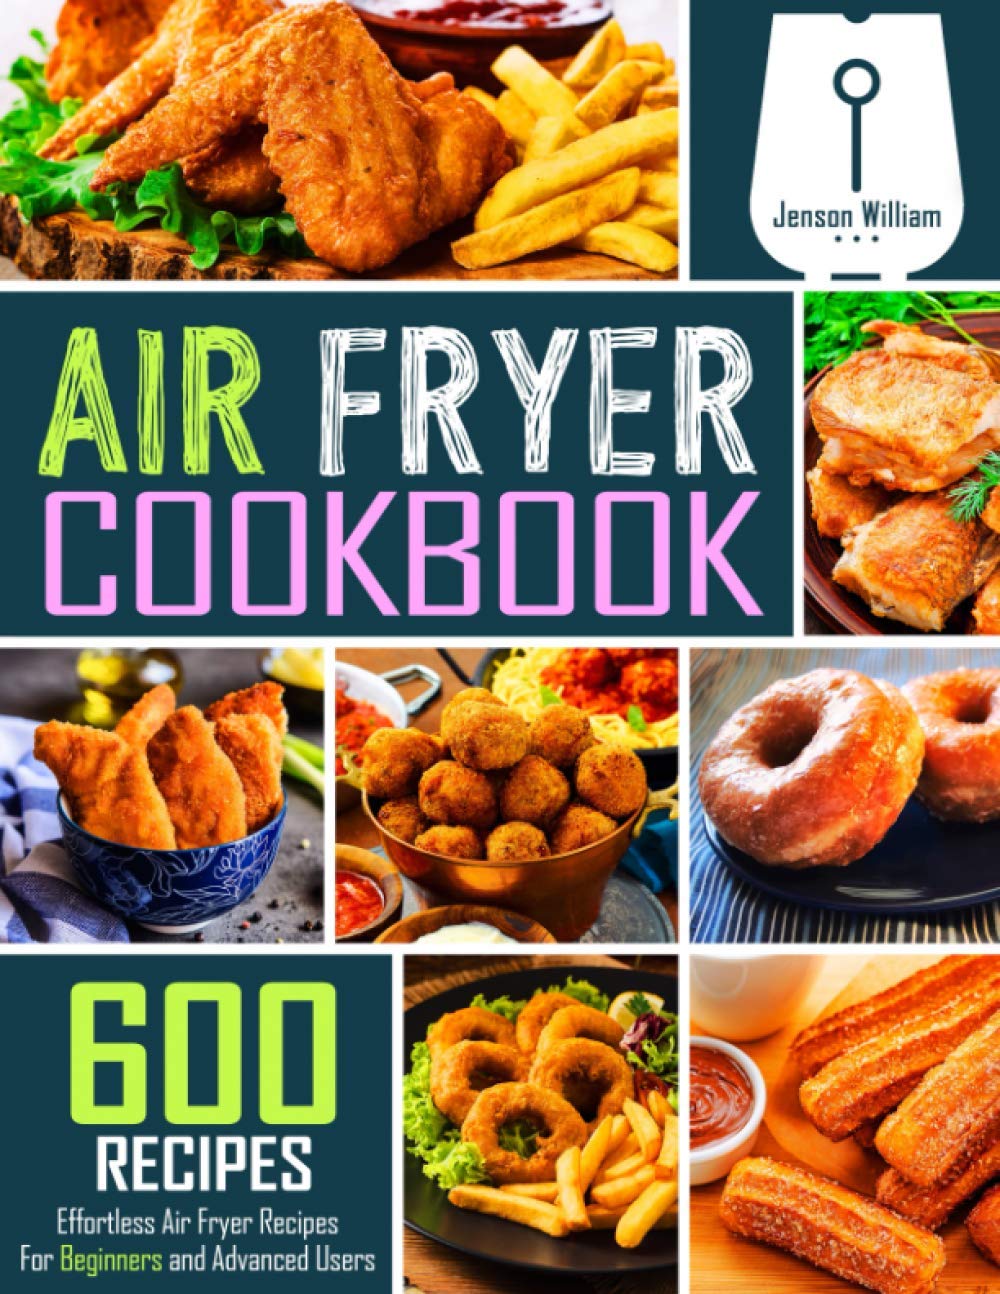 Air Fryer Cookbook: 600 Effortless Air Fryer Recipes for Beginners and Advanced Users     Paperback – December 12, 2019